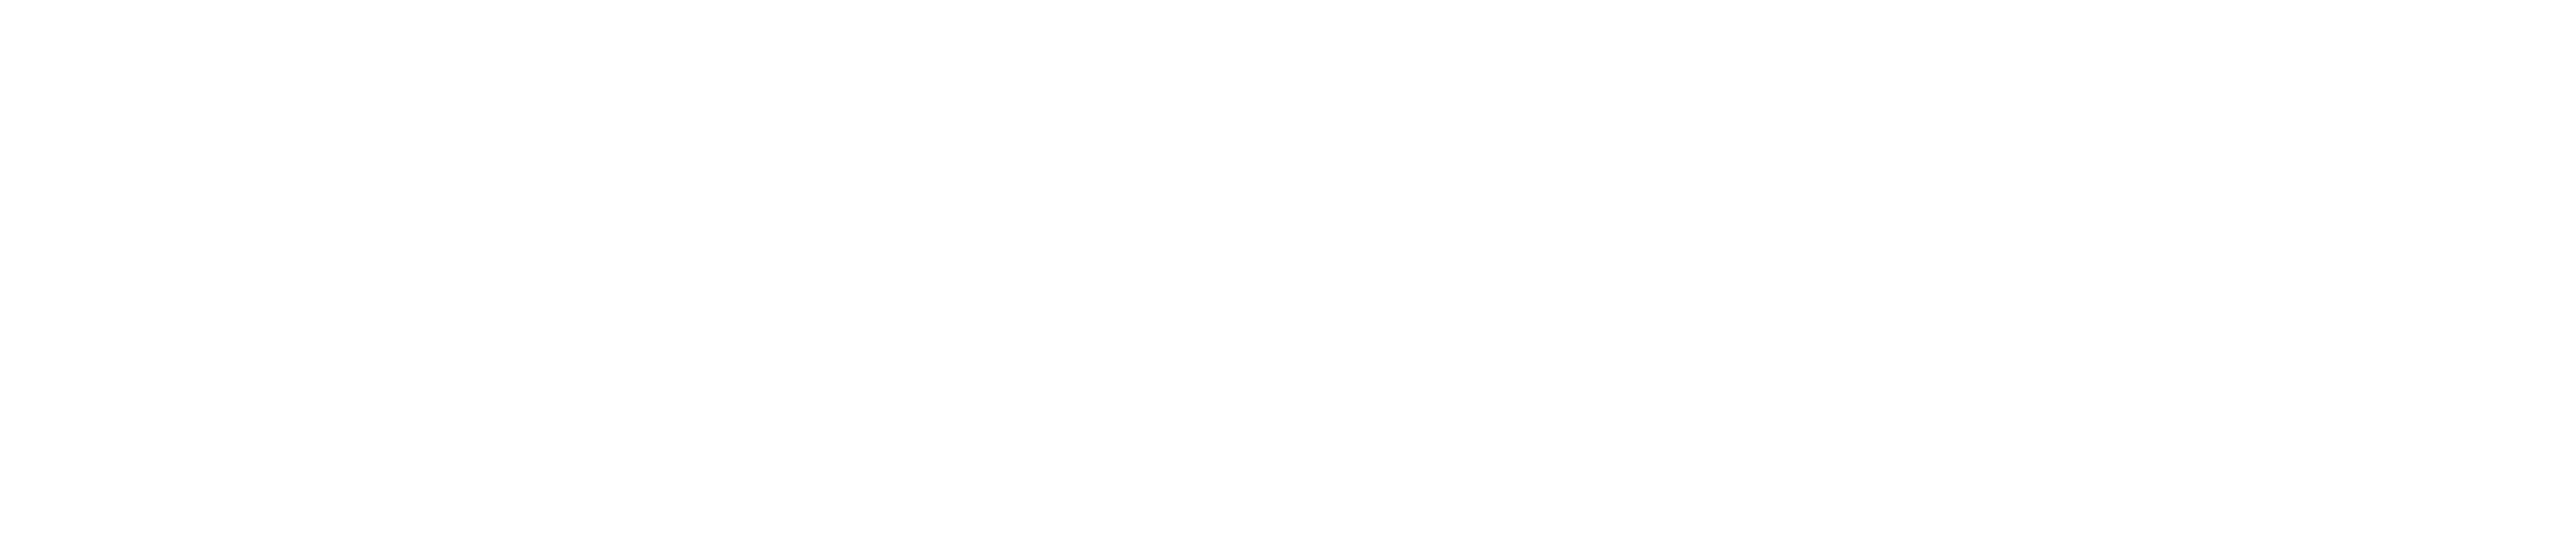 NTEL 2019 | National Technology Enhanced Learning Conference 2019